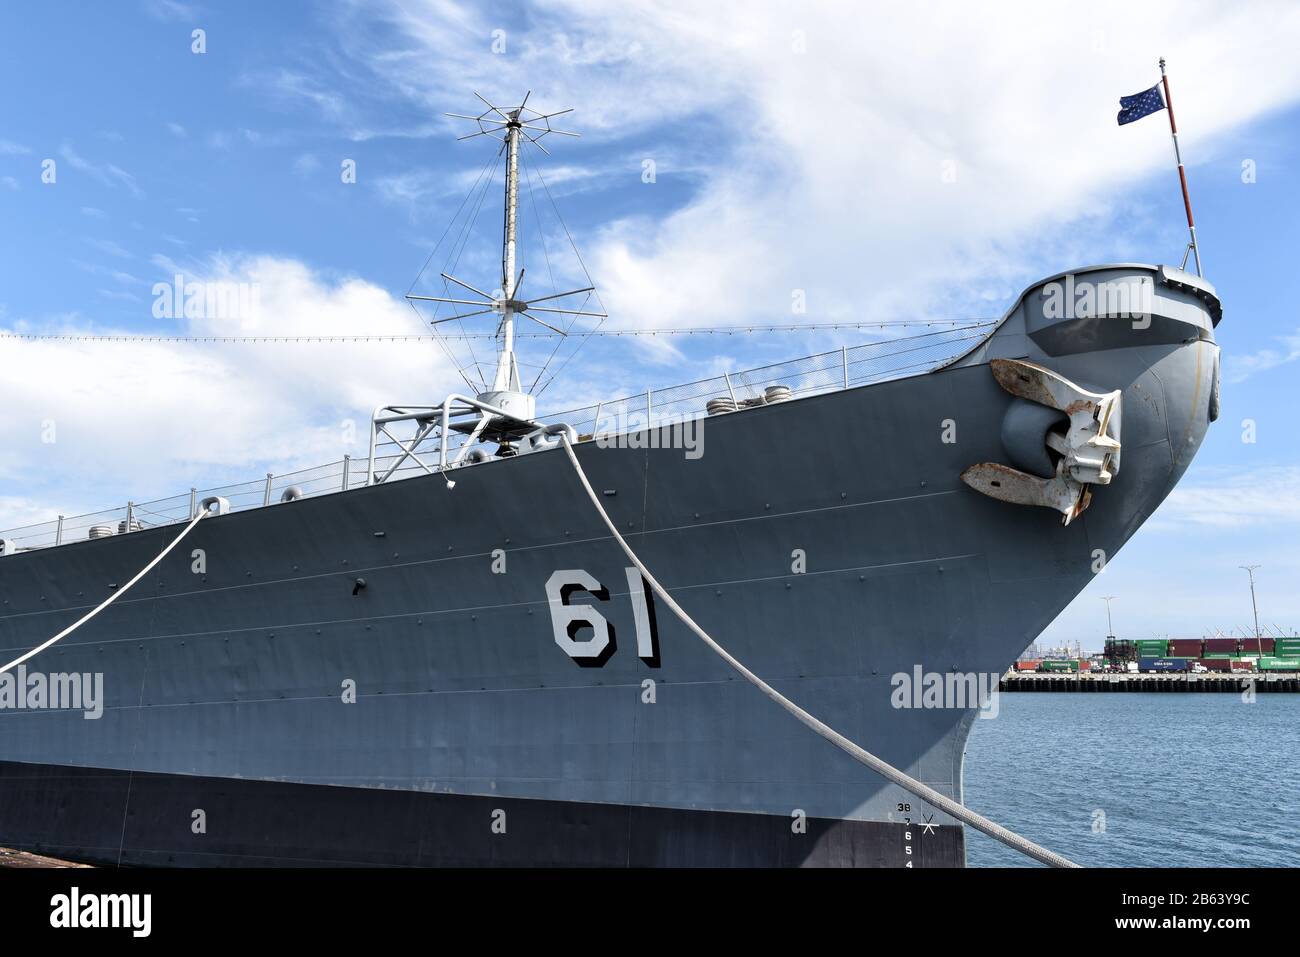 LOS ANGELES, CALIFORNIA - 06 MAR 2020: The bow of BB-61, the USS Iowa, a retired naval warship now a Maritime Museum. Stock Photo